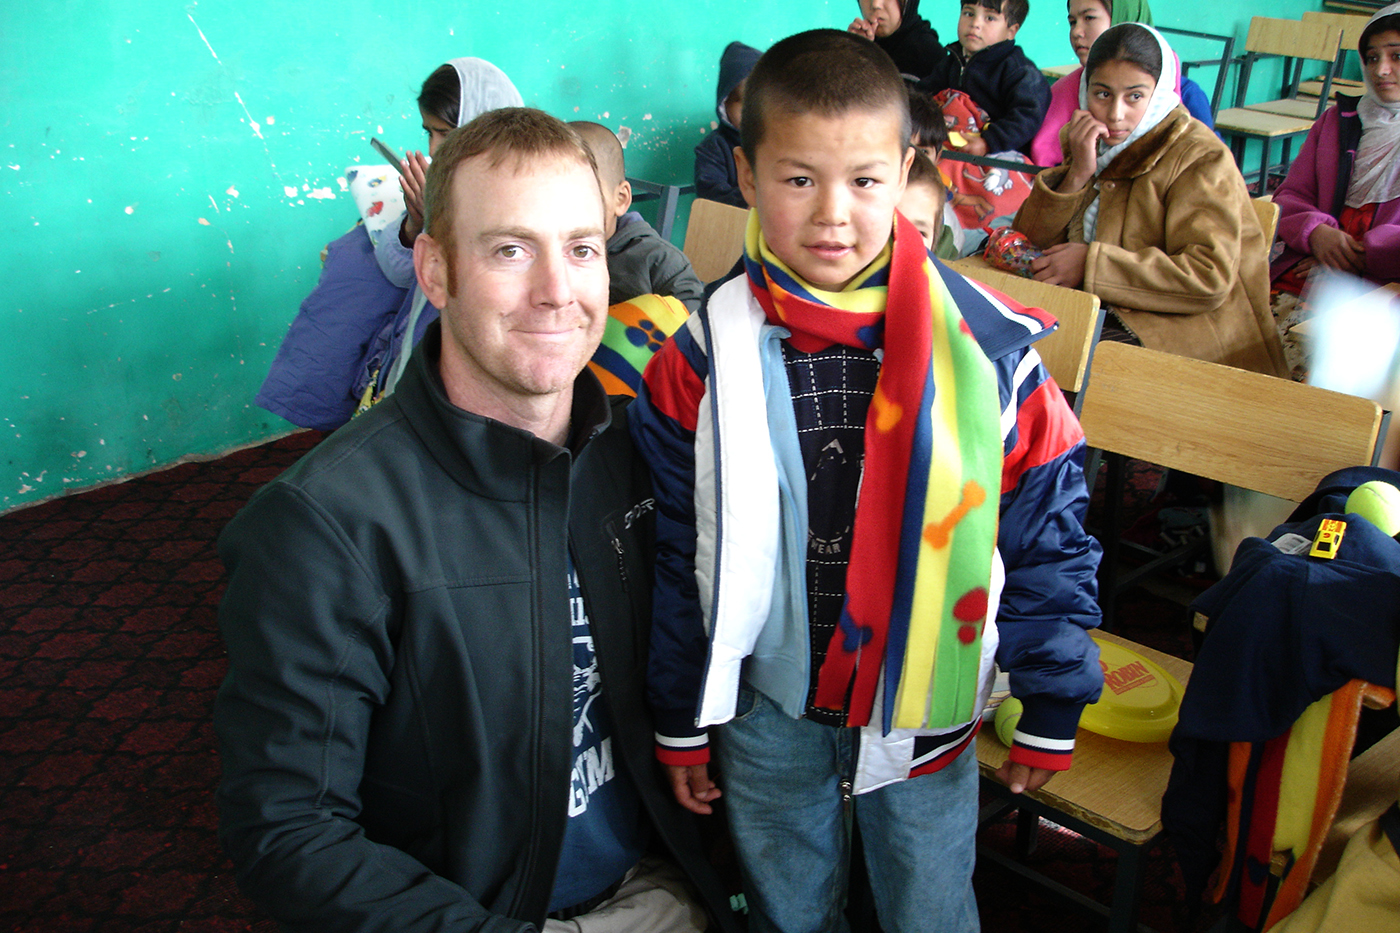 Phil McTigue visits the Kufa Orphanage in Kabul where in 2007 he and his wife delivered more than half a ton of supplies they had collected from family and friends including balls, games, musical instruments, winter accessories and quilts.